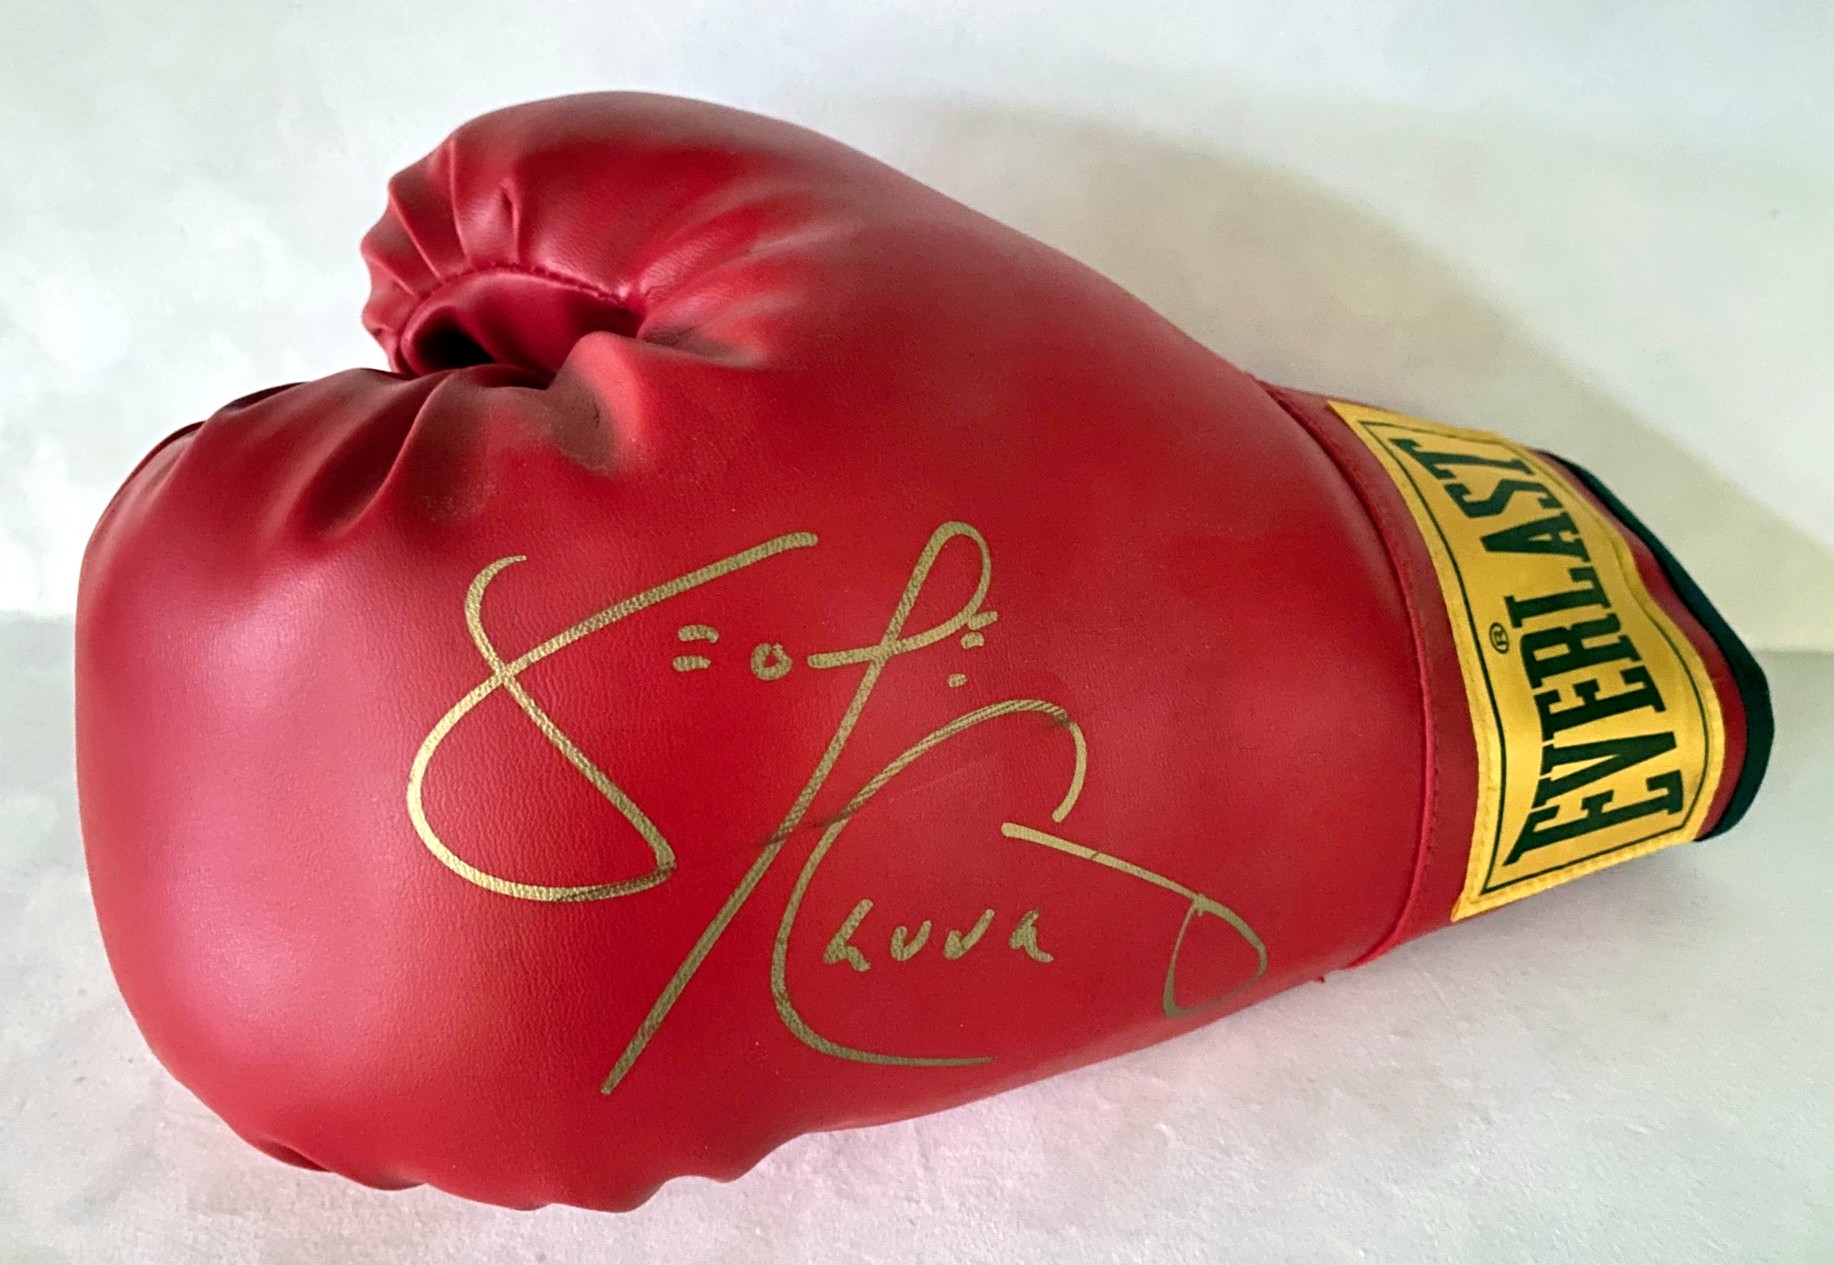 George Chuvalo Autographed Red Everlast Boxing Glove (Flawed)